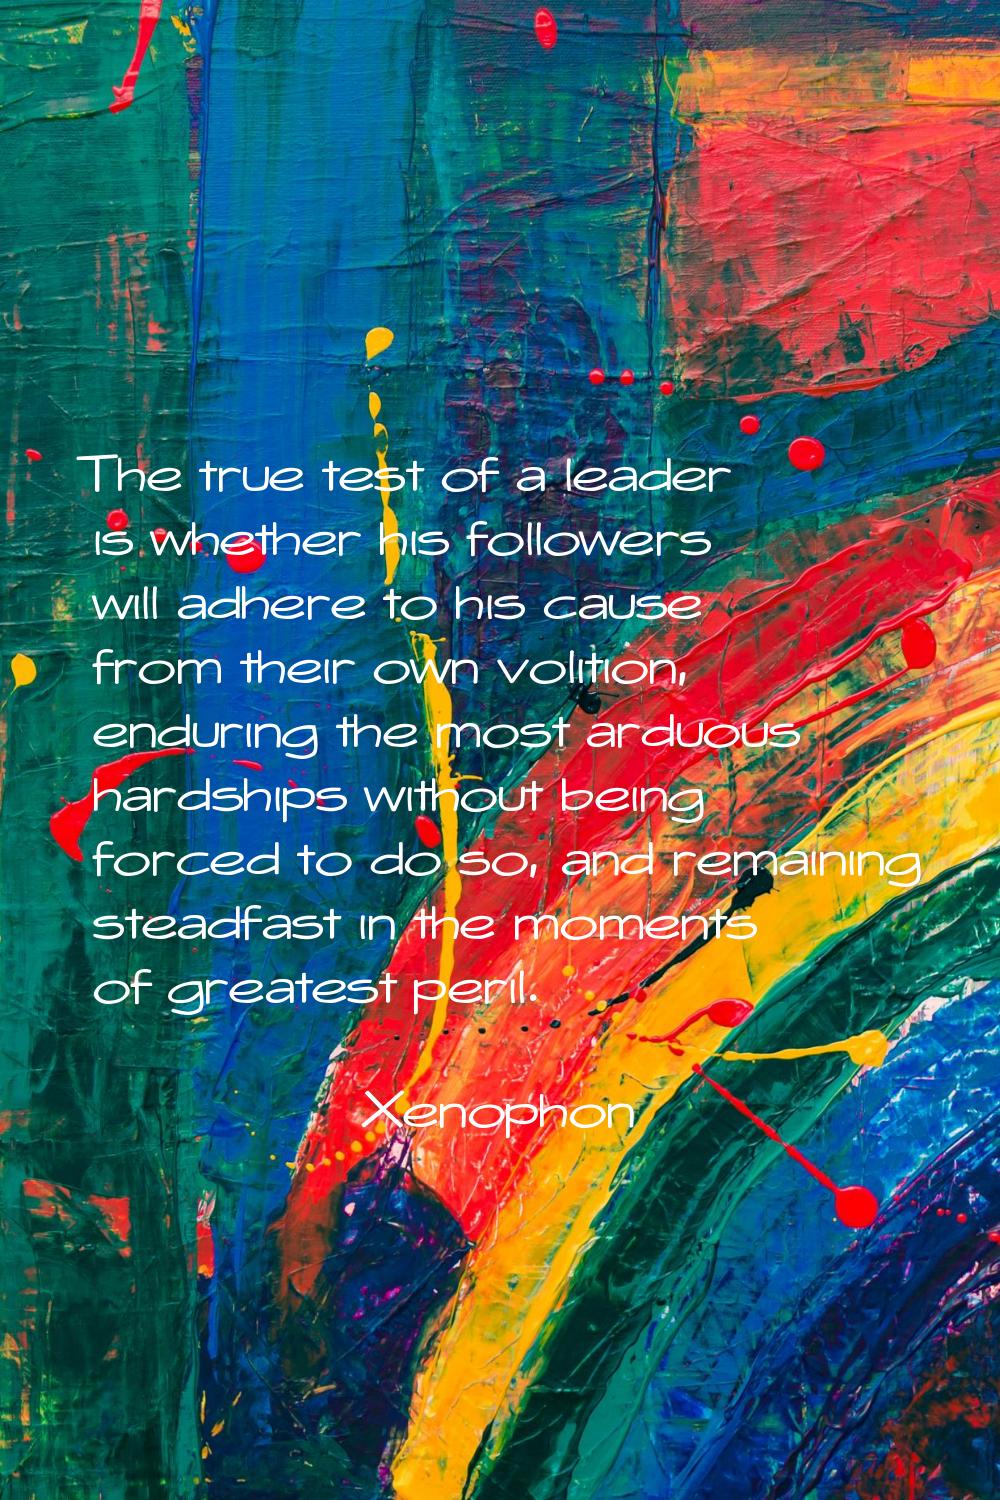 The true test of a leader is whether his followers will adhere to his cause from their own volition